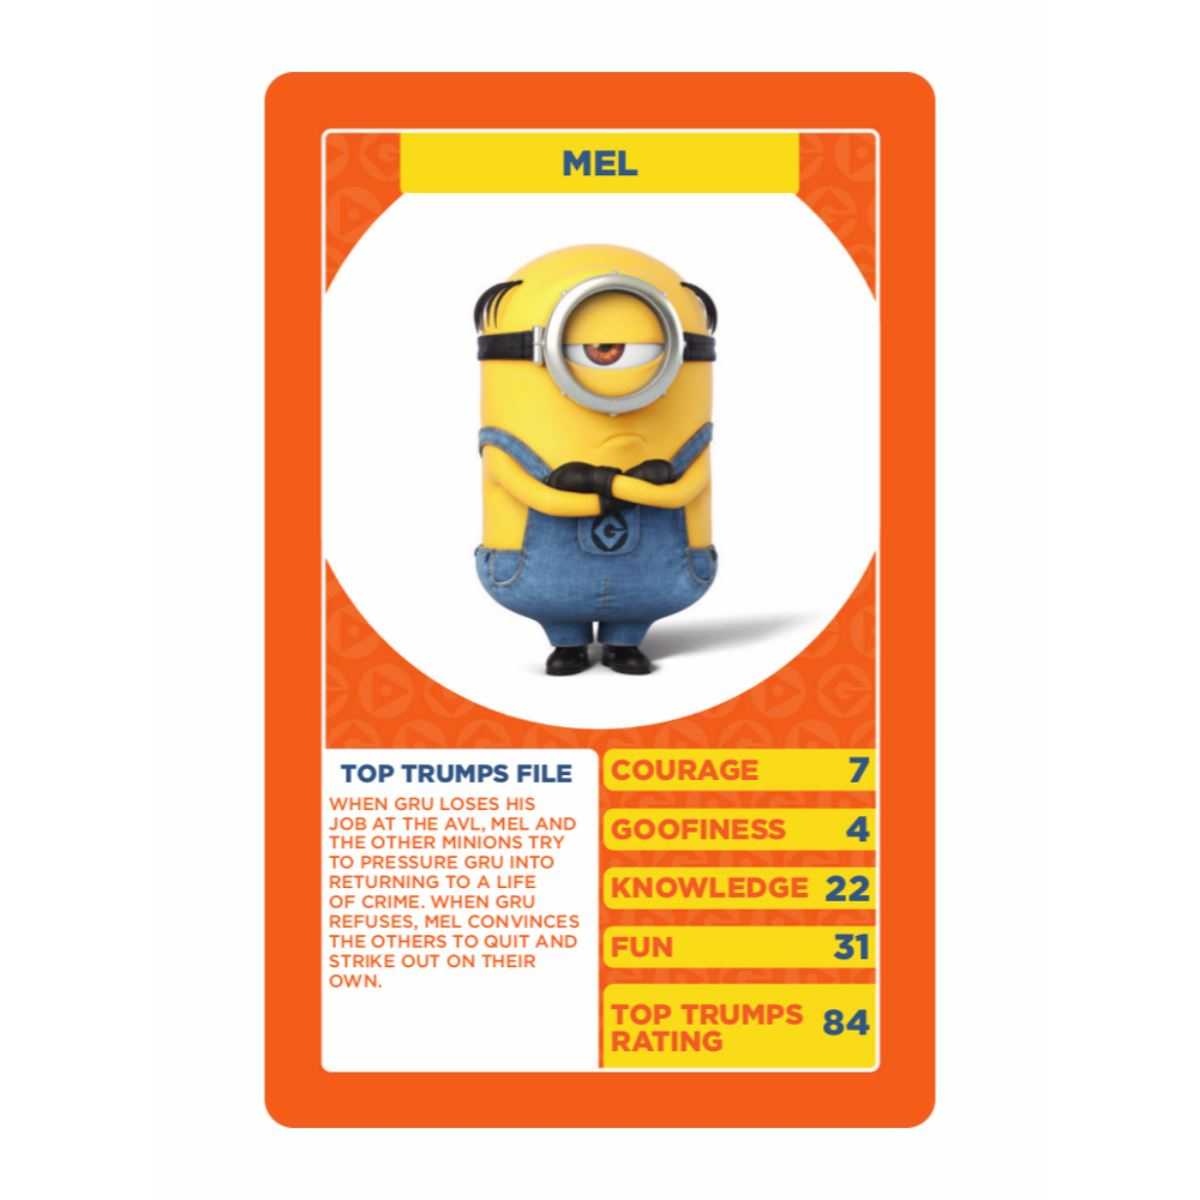 Details About Despicable Me 3 Top Trumps Card Game In Top Trump Card Template